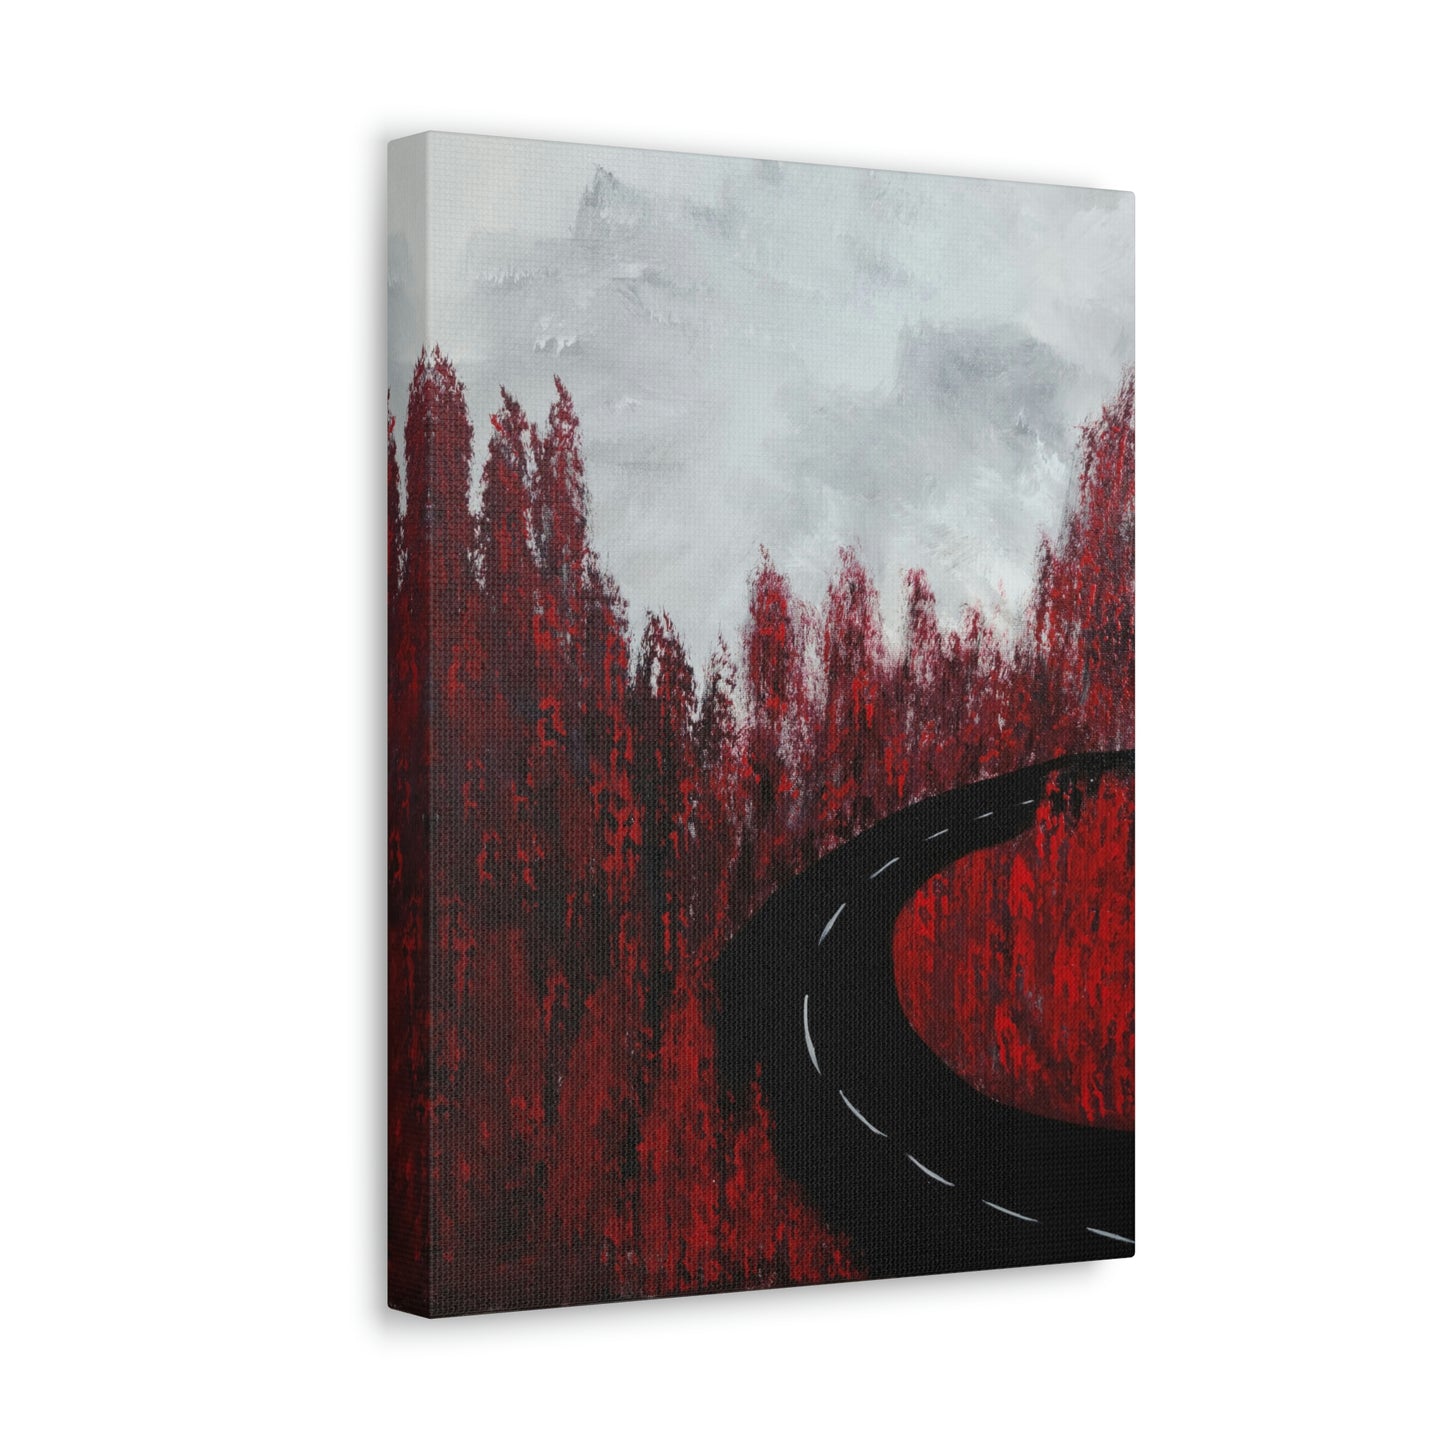 Road To No-Where Gallery Wrap Canvas Print